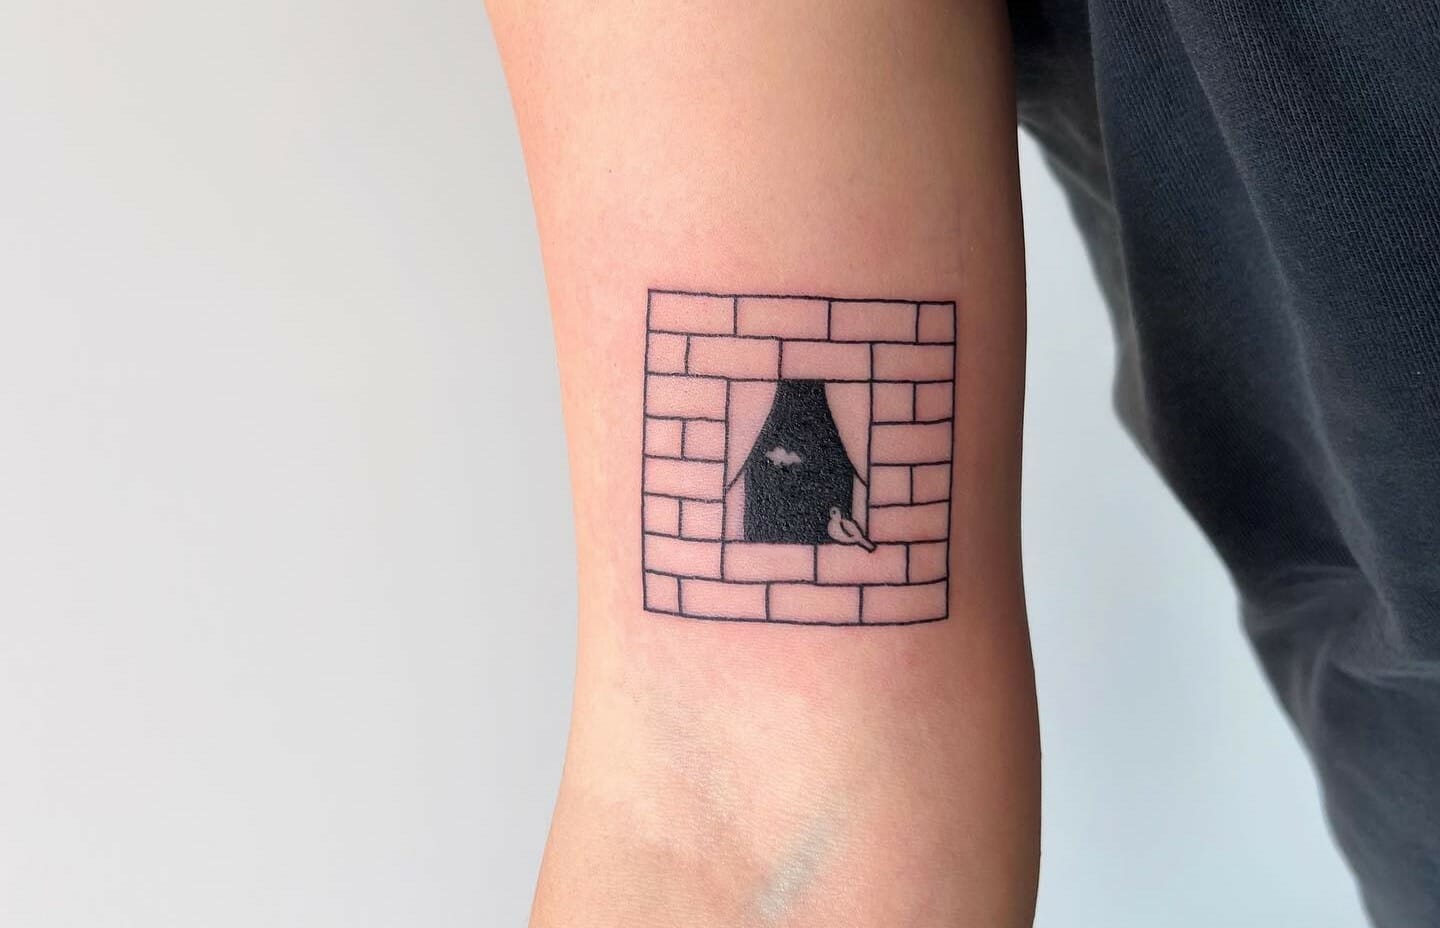 Daniel McCreanor on Twitter Why would you get a tattoo of a brick wall  Thats a canvas on a canvas Thats like painting a wallpaper design on  some wallpaper httpstcomBKCSK44Tc  Twitter